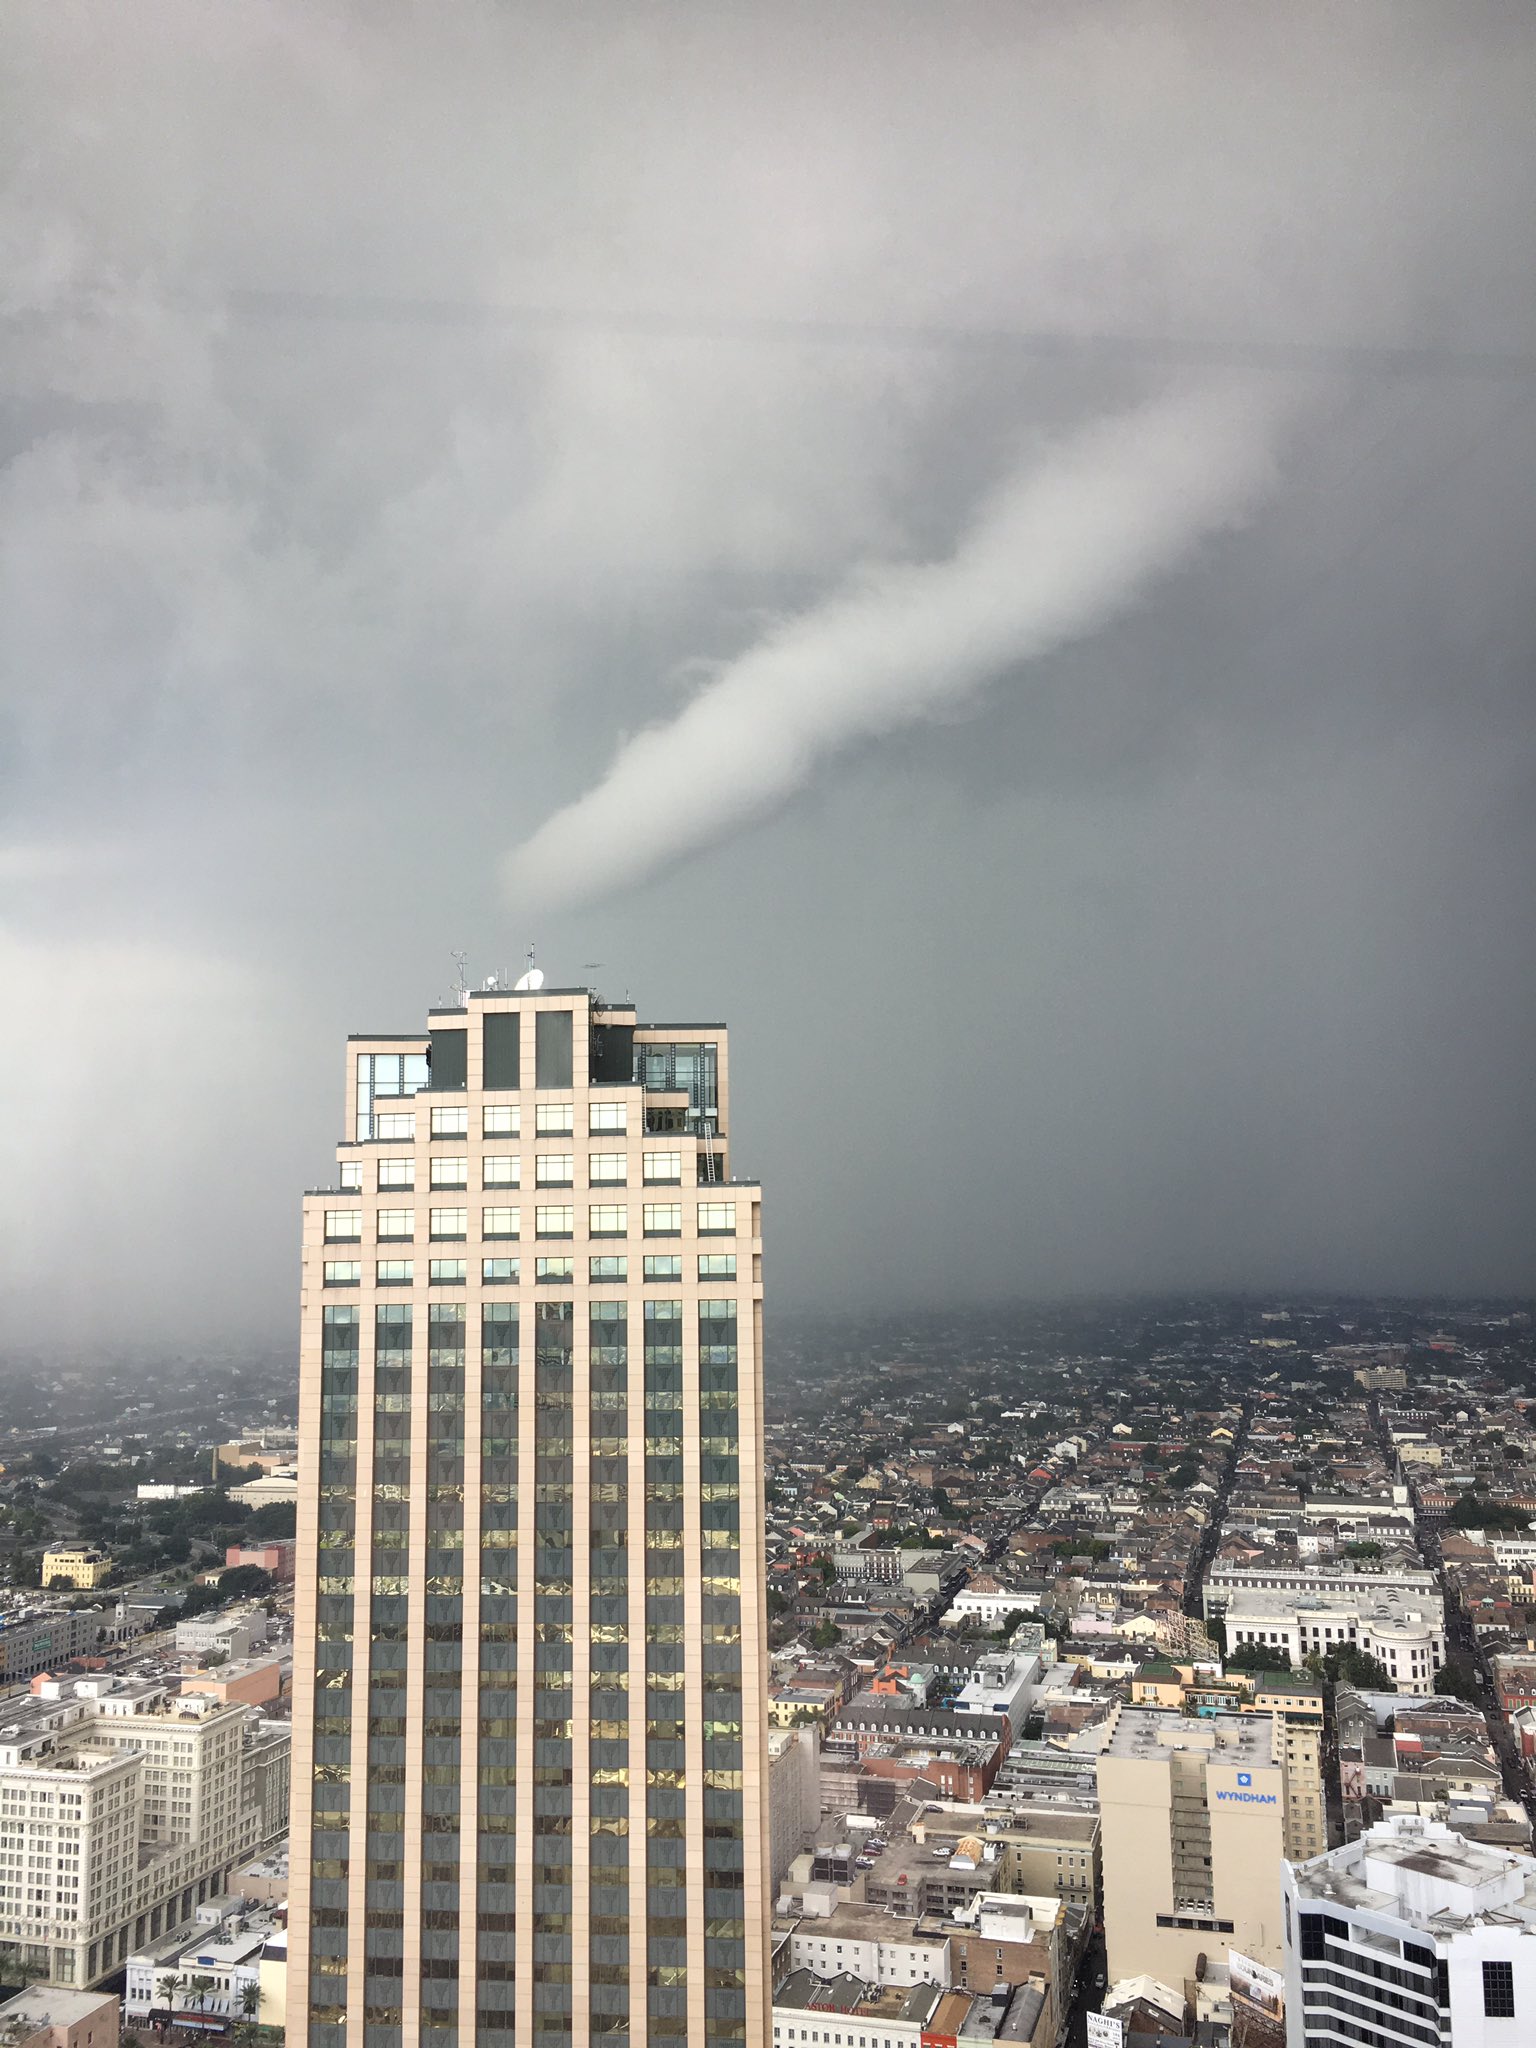 Nws Confirms Tornado Touched Down In New Orleans